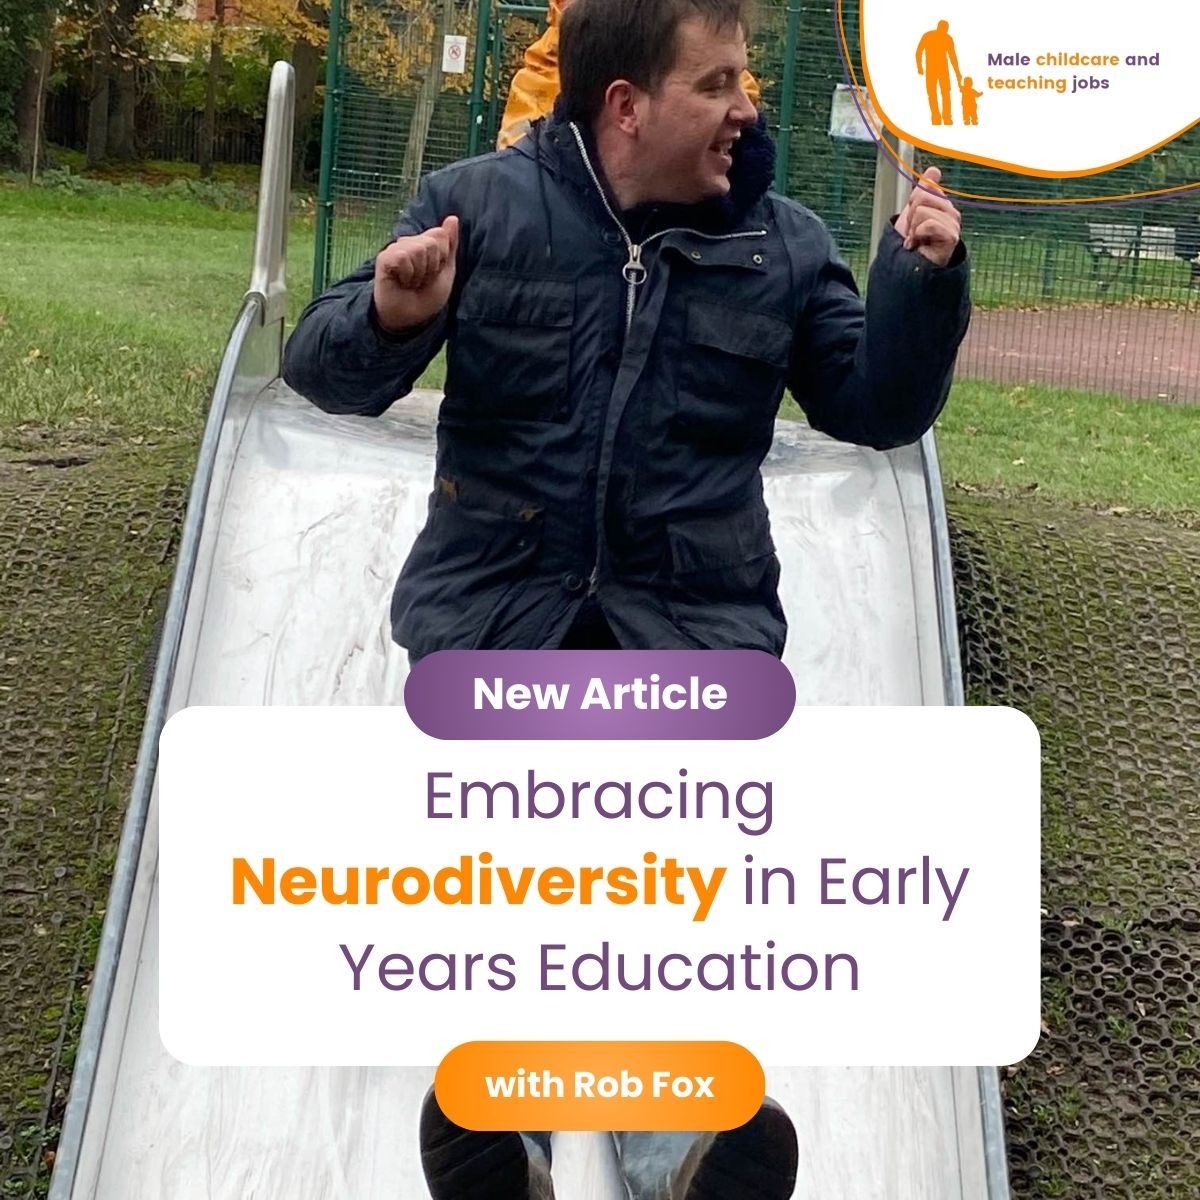 In our latest article, we delve into the world of neurodiversity in early years education, where educators like Rob Fox are not just teaching - they are revolutionising how we understand and embrace diverse minds: buff.ly/3w2ihWm 

#Neurodiversity #EarlyYearsEducation